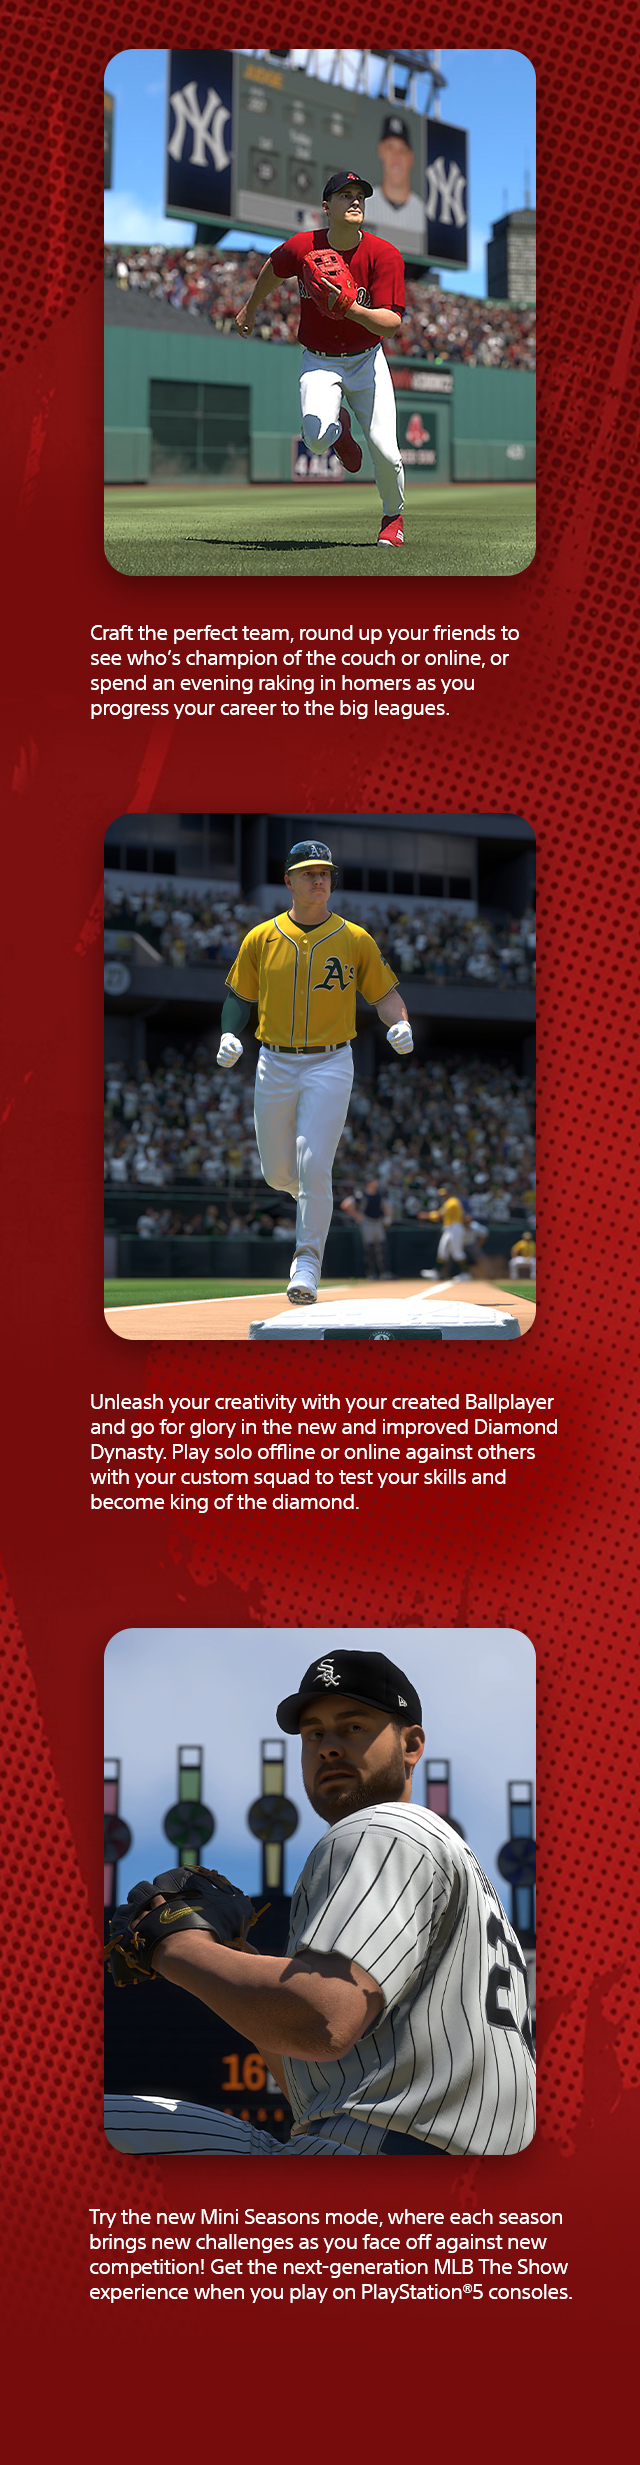 Sony Playstation Games MLBtheshow22 03.30.22overview2